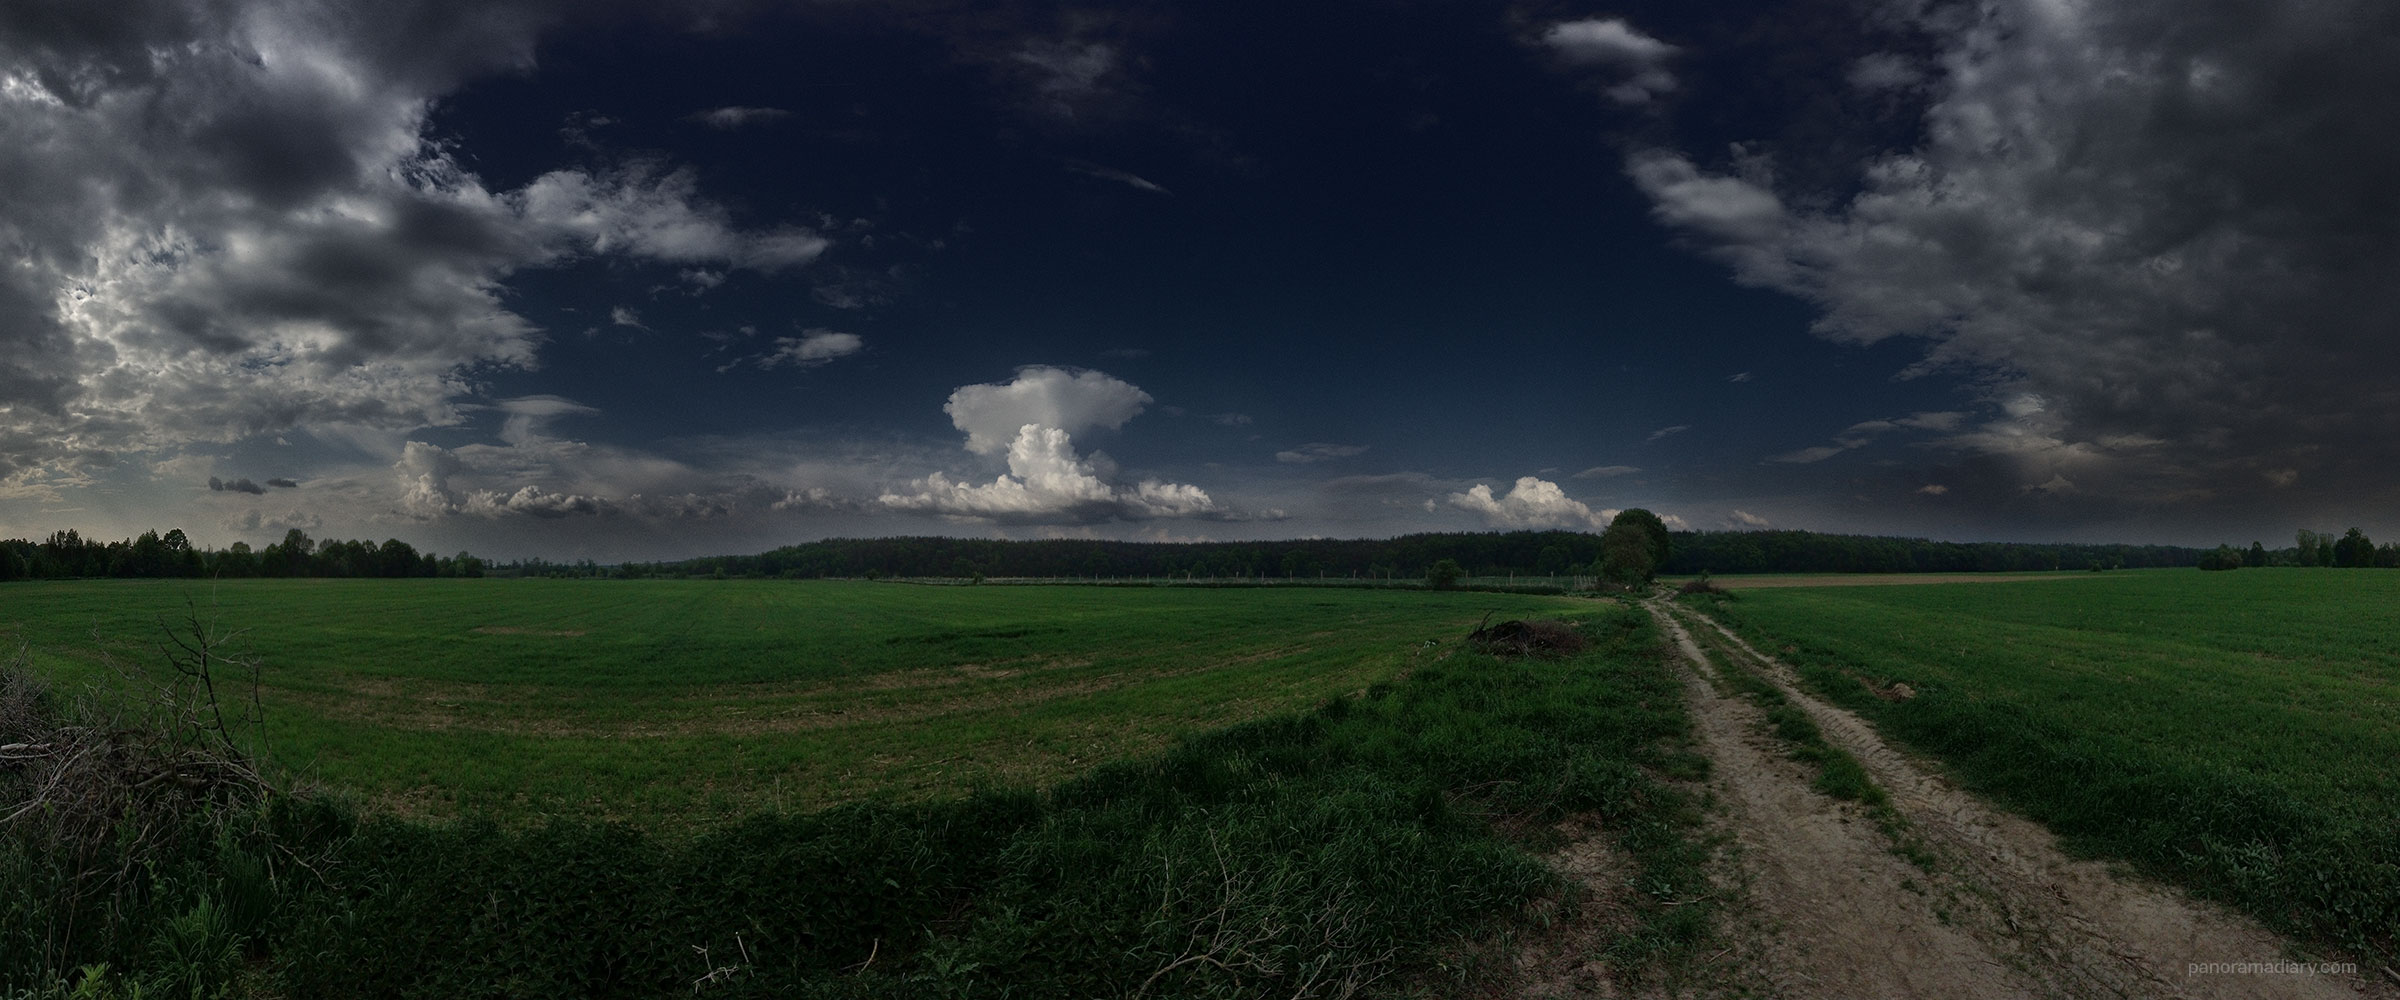 PANORAMA DIARY | Dying storms over Lusatia rural landscape